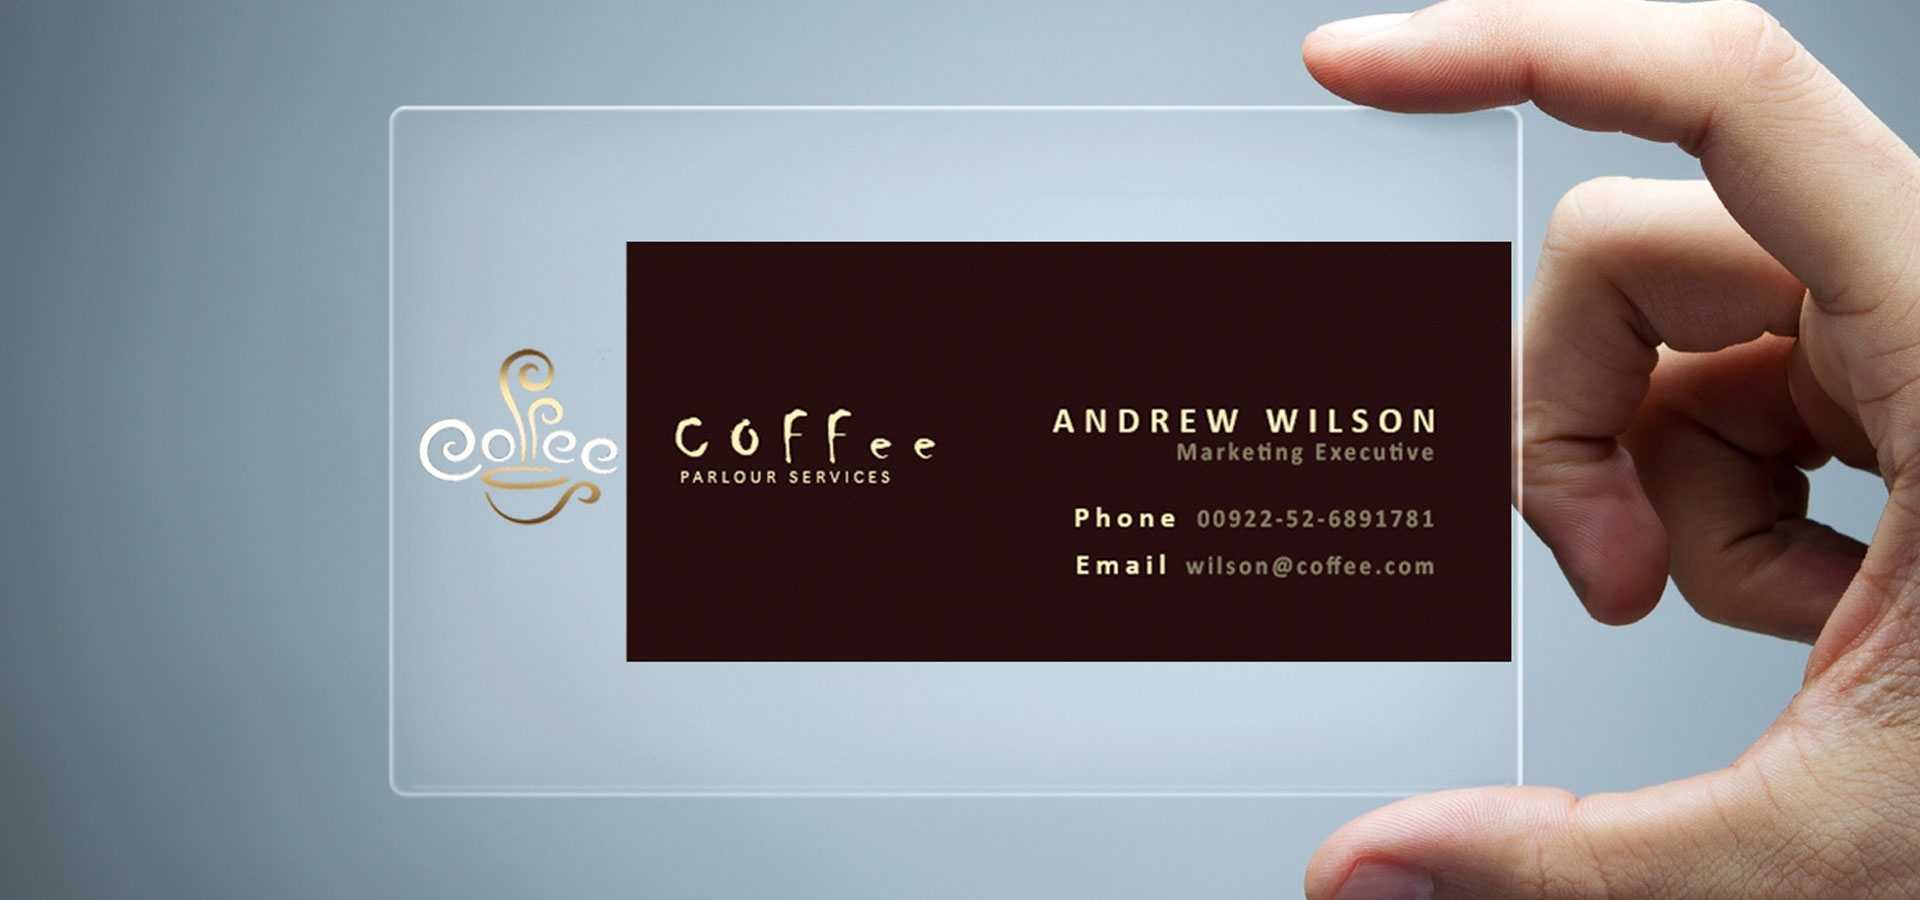 Architect Visiting Card Design Psd Free Download – Yeppe With Construction Business Card Templates Download Free